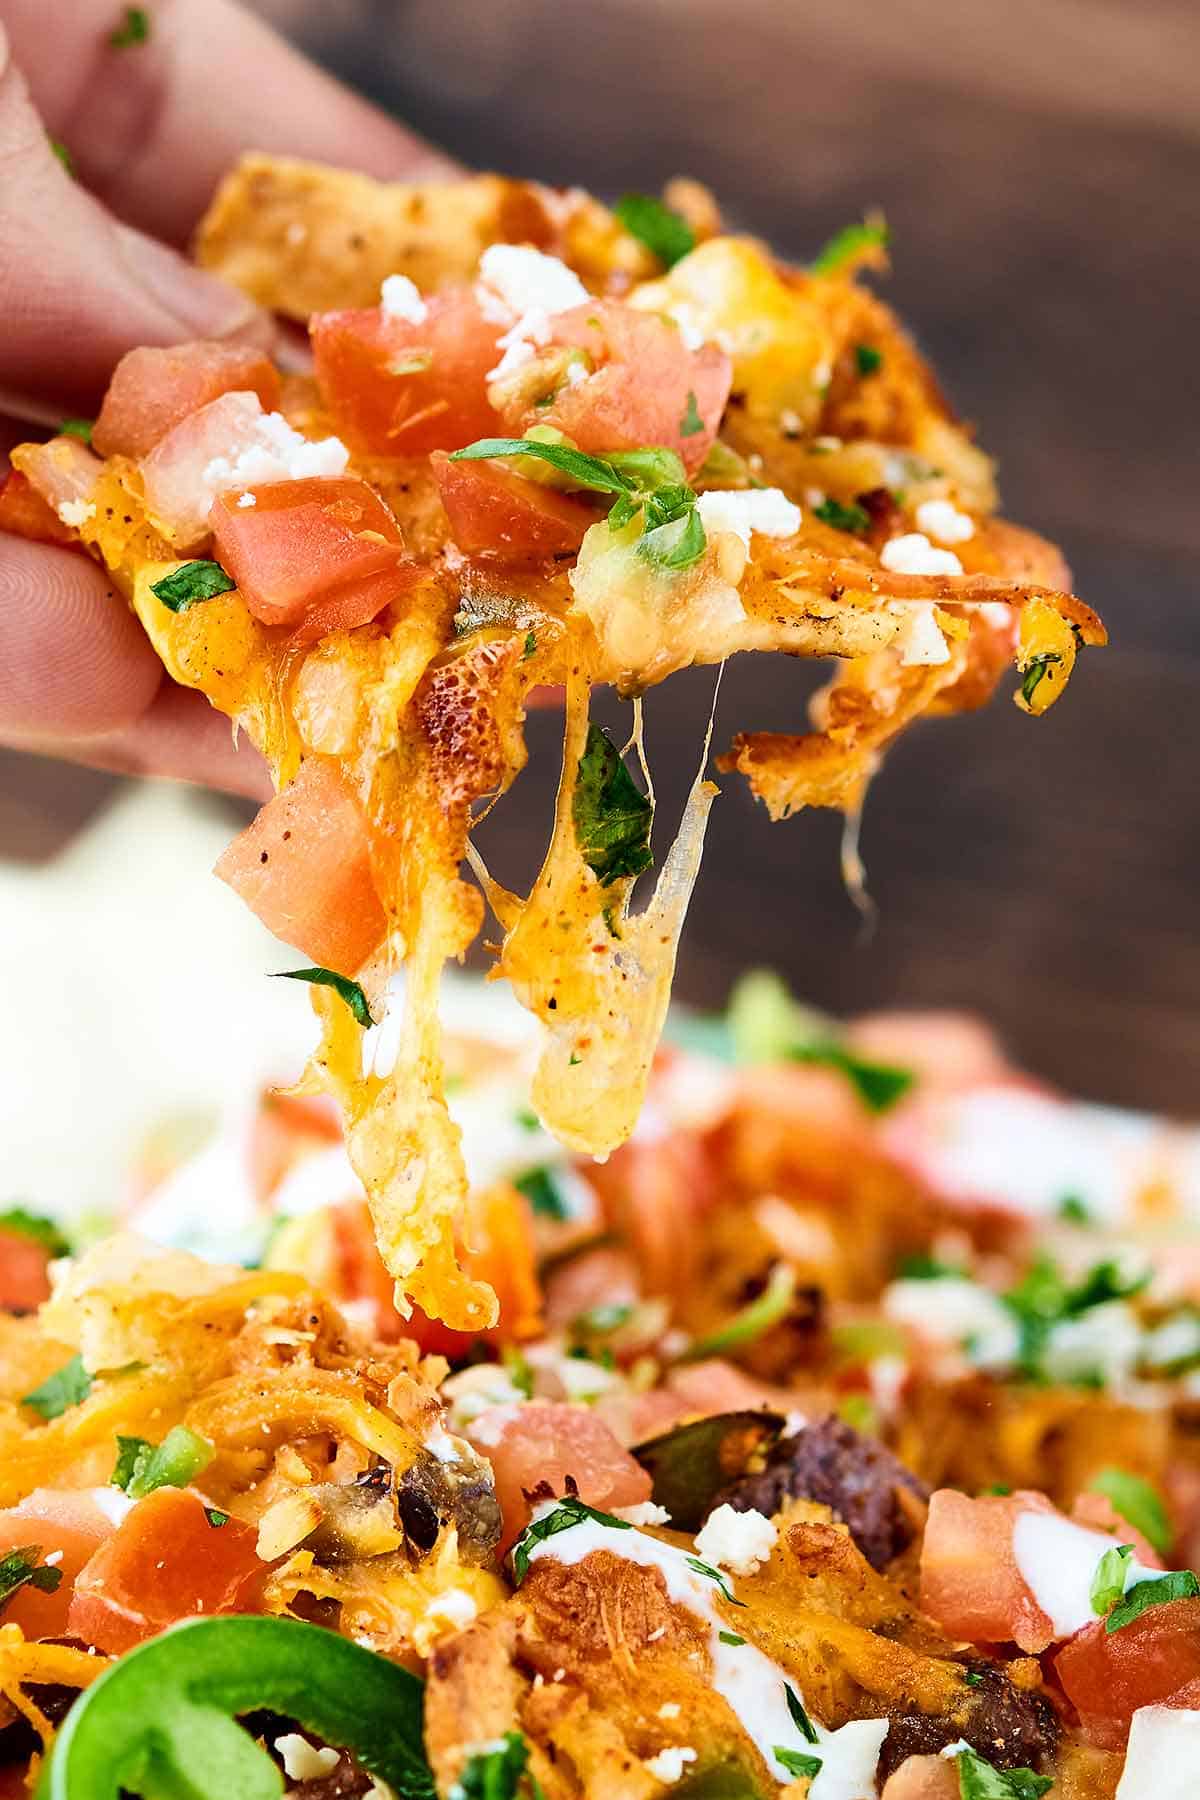 These Loaded Chicken Nachos have 12 layers! and are full of tender veggies, flavorful chicken, beans, corn, and TONS of cheese. Surprisingly quick, easy and delicious! showmetheyummy.com #chicken #nachos